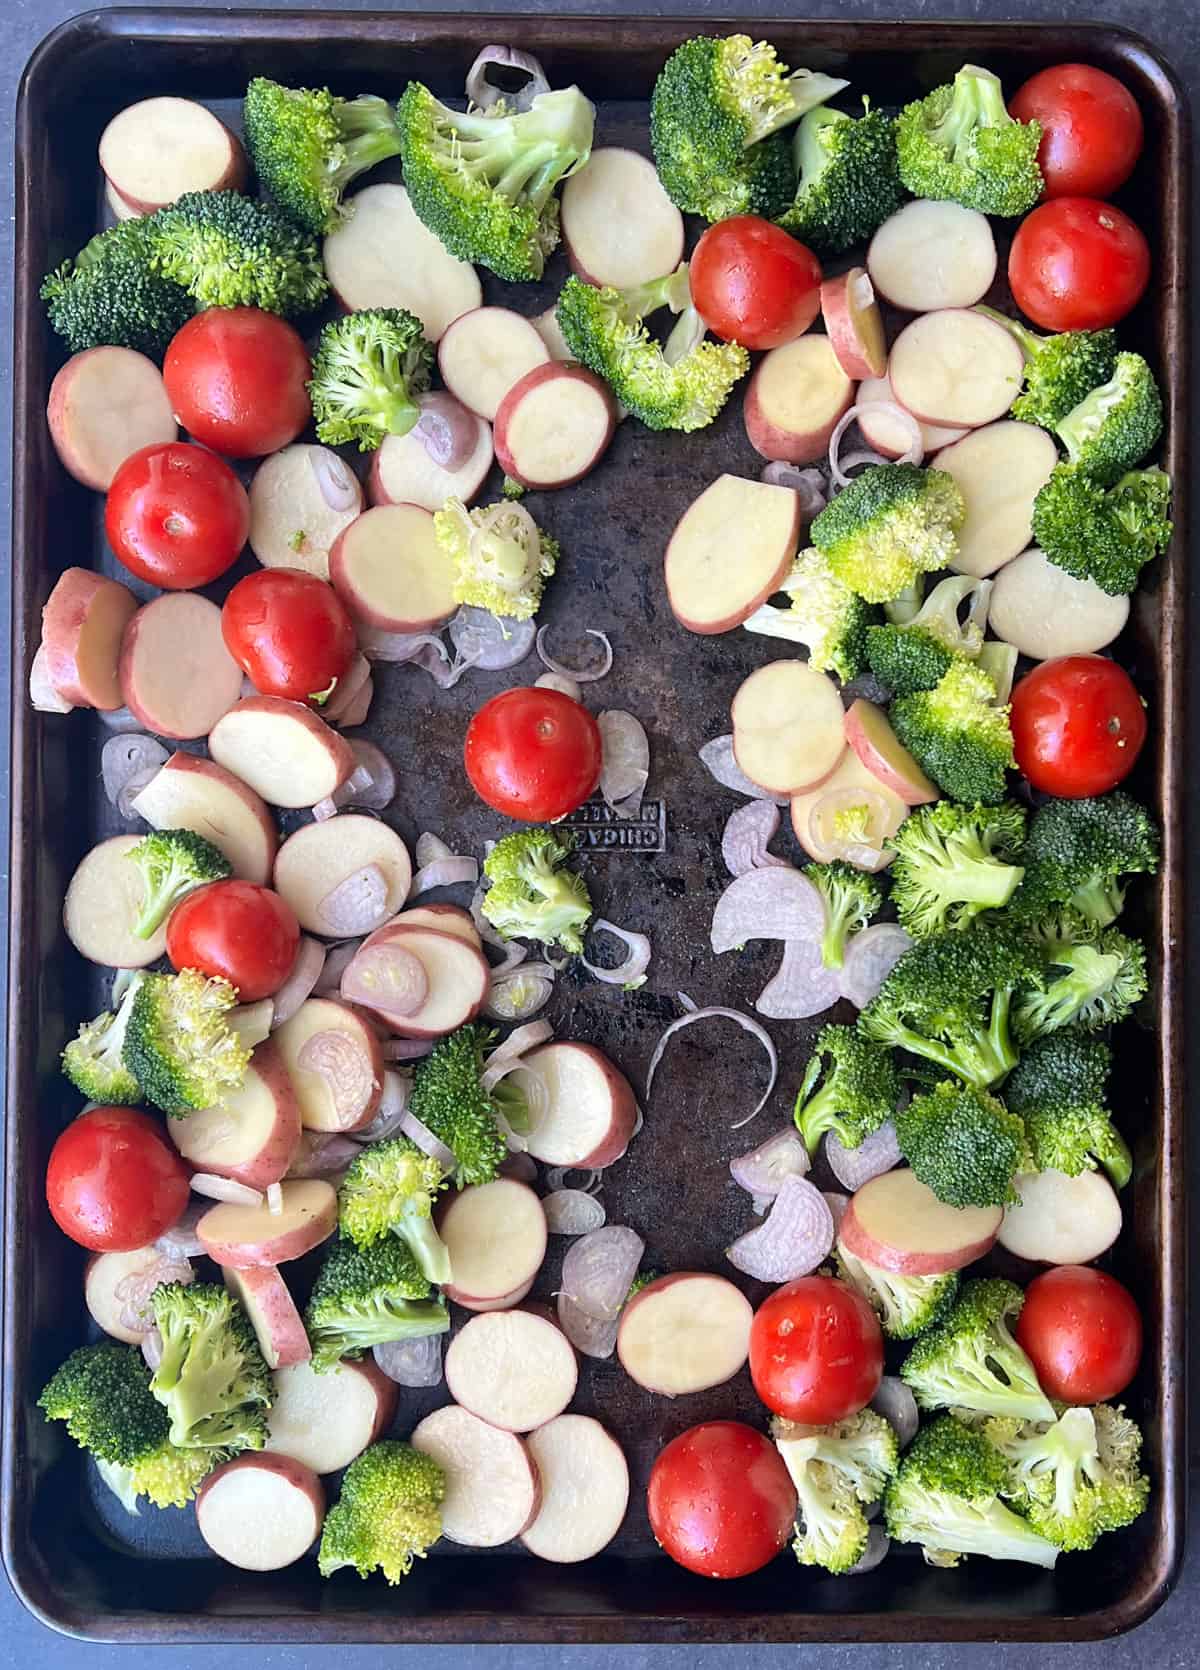 Sheet pan filled with veggies and potatoes, a slit down the center making room for a pork tenderloin.